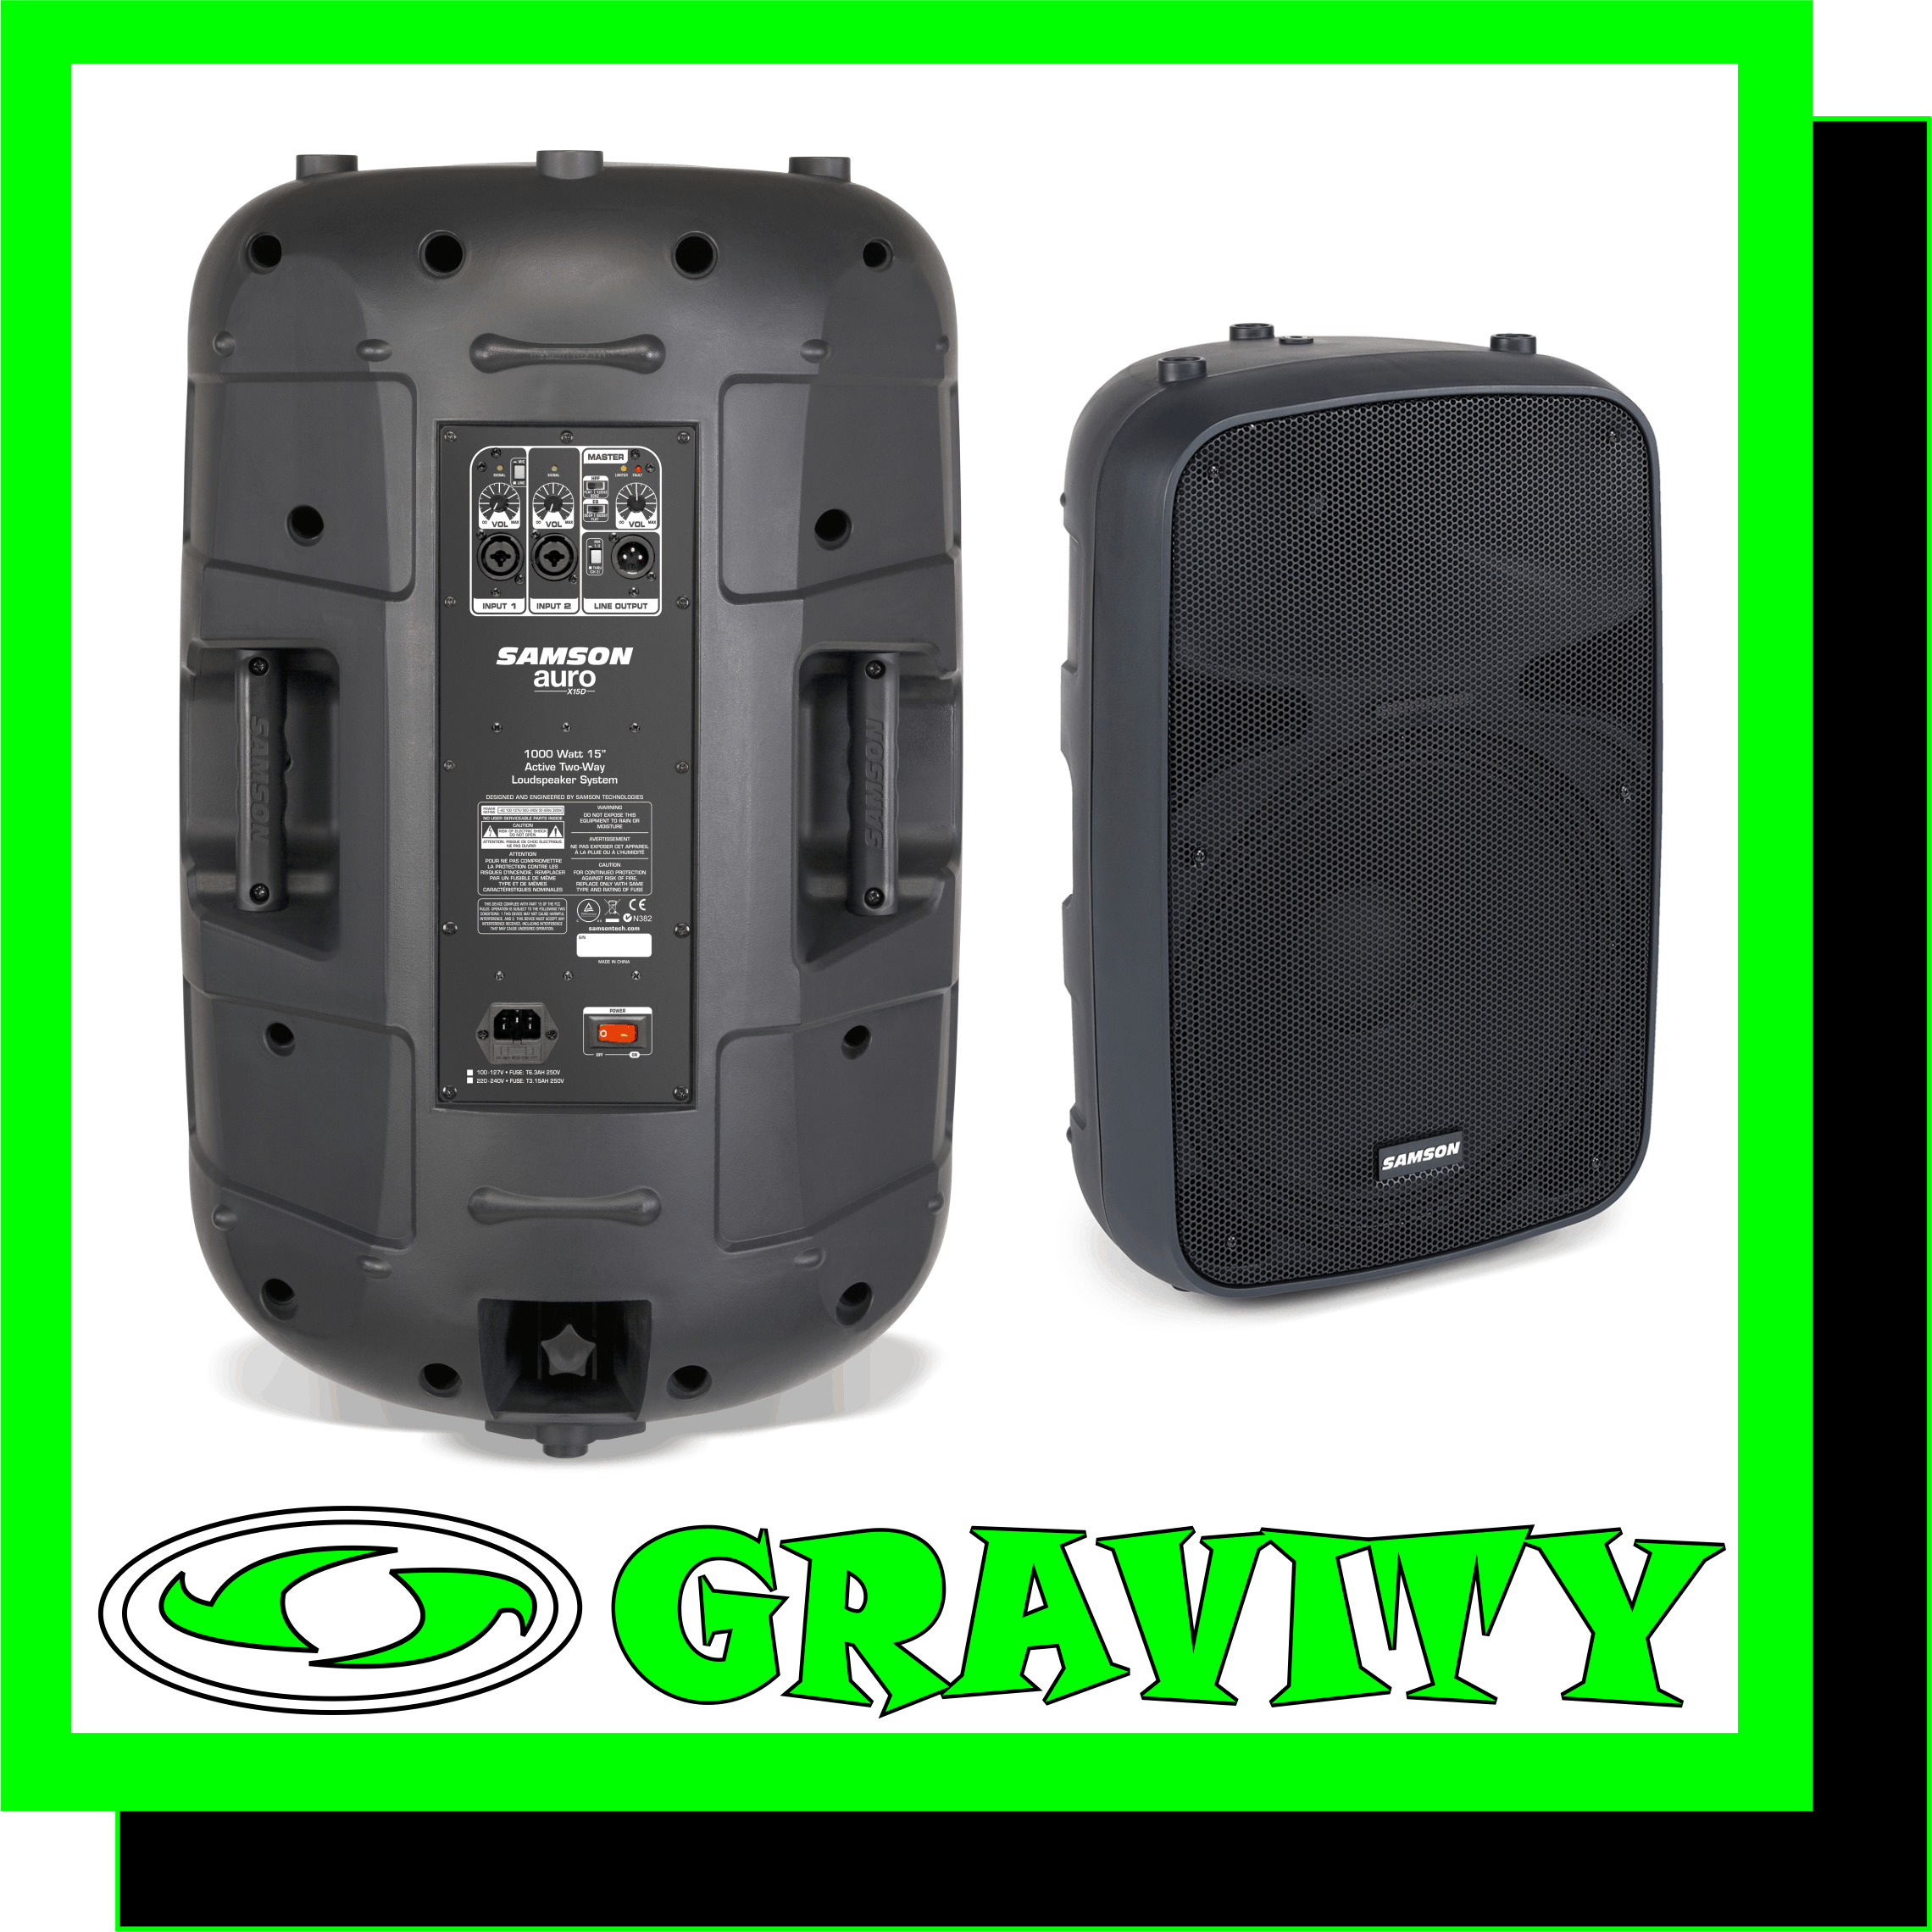 Serious Power & Sonic Purity. Samson's Auro X15D 2-Way Active Loudspeaker provides outstanding reliability and sound quality for musicians, DJs and other live sound professionals. When sound matters, the Auro X15D is the solution   -Compact, lightweight Class D 2-way active loudspeakers -1,000 watts of output power -15" extended range low frequency driver -1.34" (34mm) titanium compression driver -Samson's R.A.M.P. (Reactive Alignment/Maximum Protection) DSP technology -Master Volume control with peak indicator -Two XLR-1/4" combo input channels with independent volume controls -3-position EQ and HPF presets -XLR Link output allows expanded sound to additional speakers -Solid polypropylene enclosure with impact resistant design -Full metal grill protects all speaker components -Two large ergonomic carry handles -Integrated 1 3/8" speaker stand mount -Dual-angle floor monitor positioning options